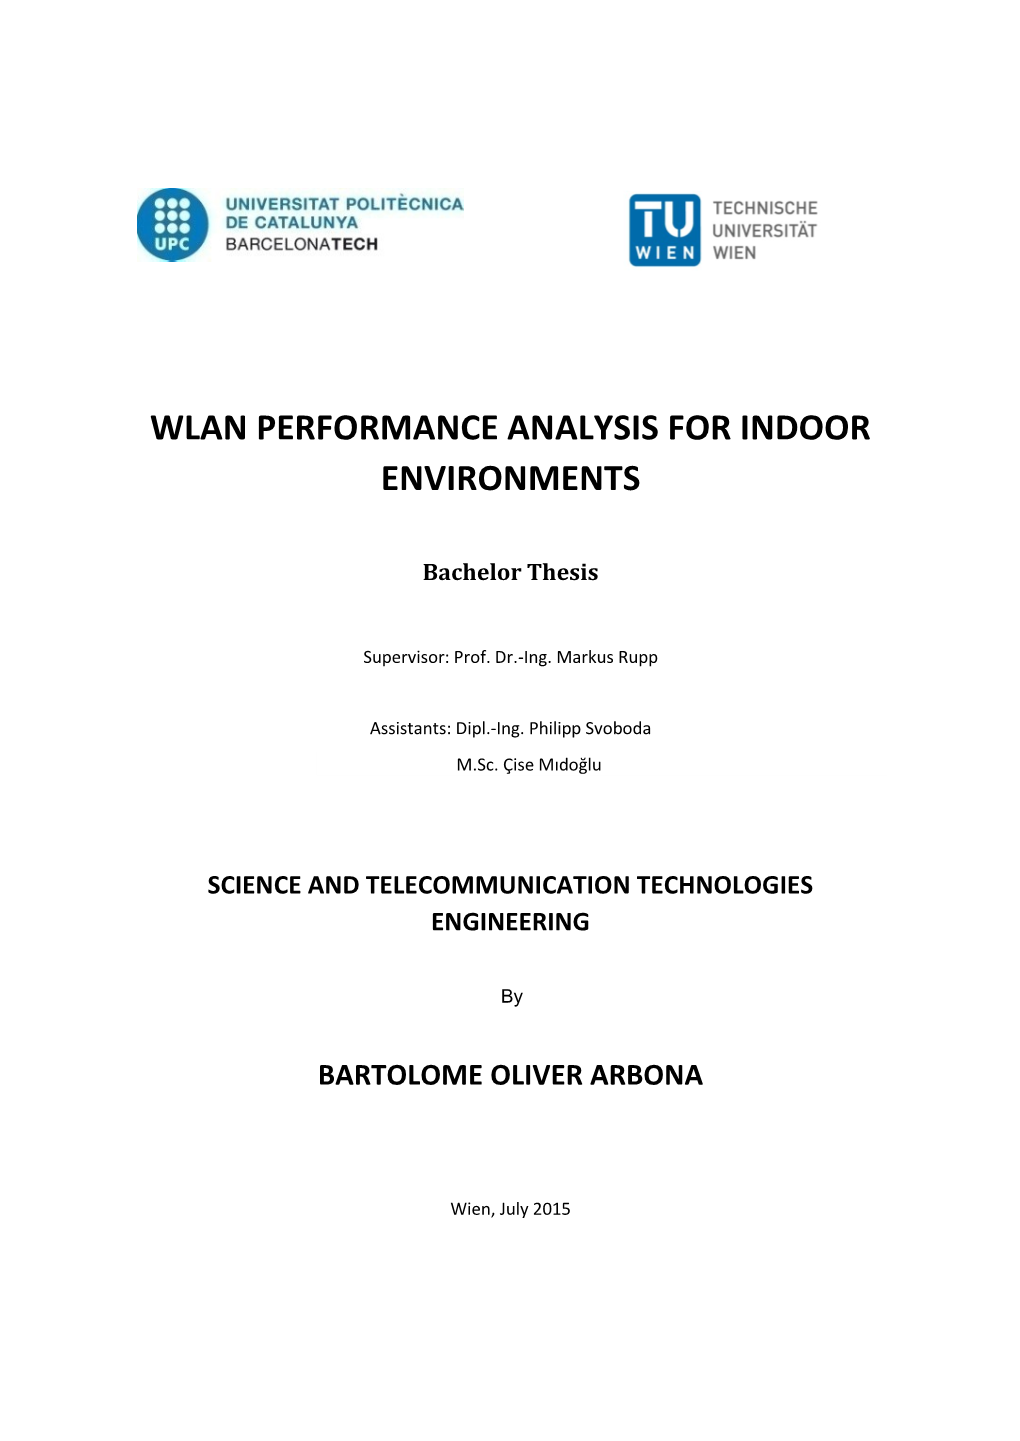 Wlan Performance Analysis for Indoor Environments